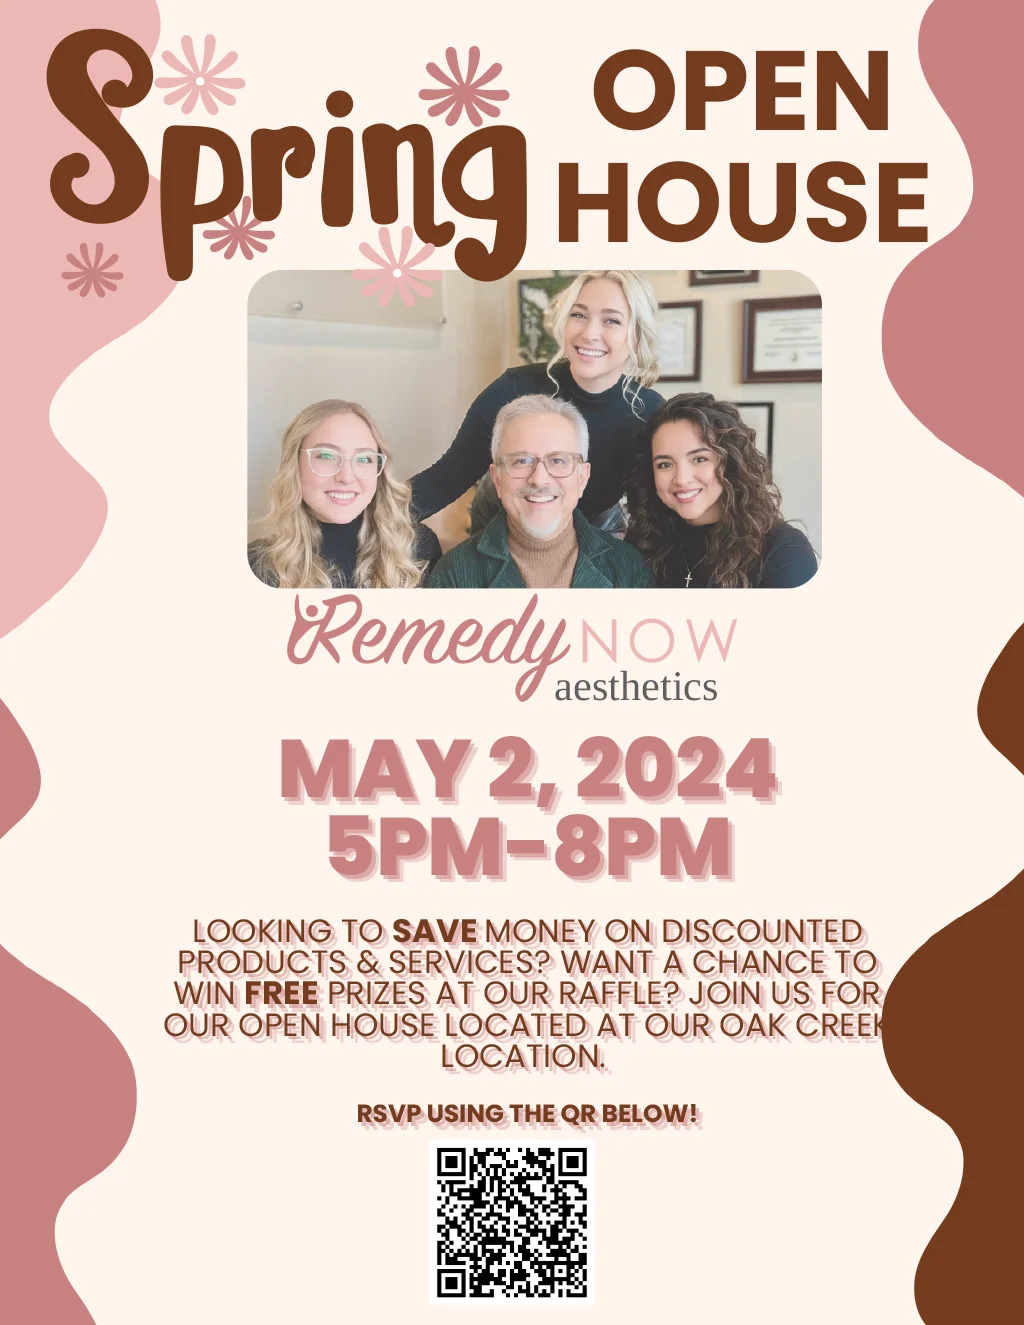 Spring Open House! May 2, 2024 5PM - 8PM